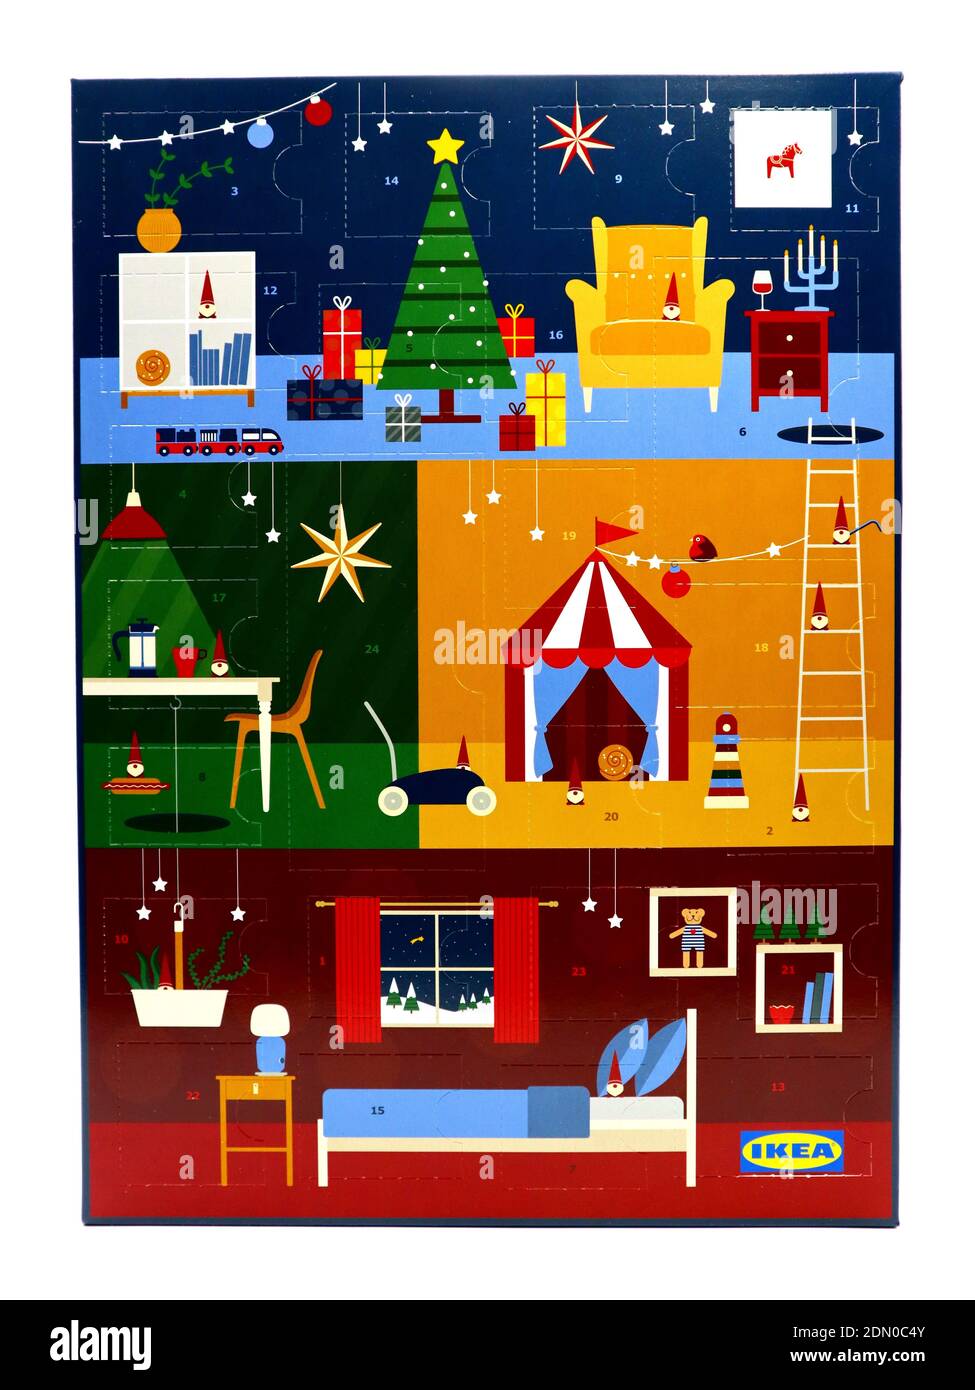 IKEA Advent Calendar. IKEA is the world's largest furniture retailer and  sells ready to assemble furniture Stock Photo - Alamy